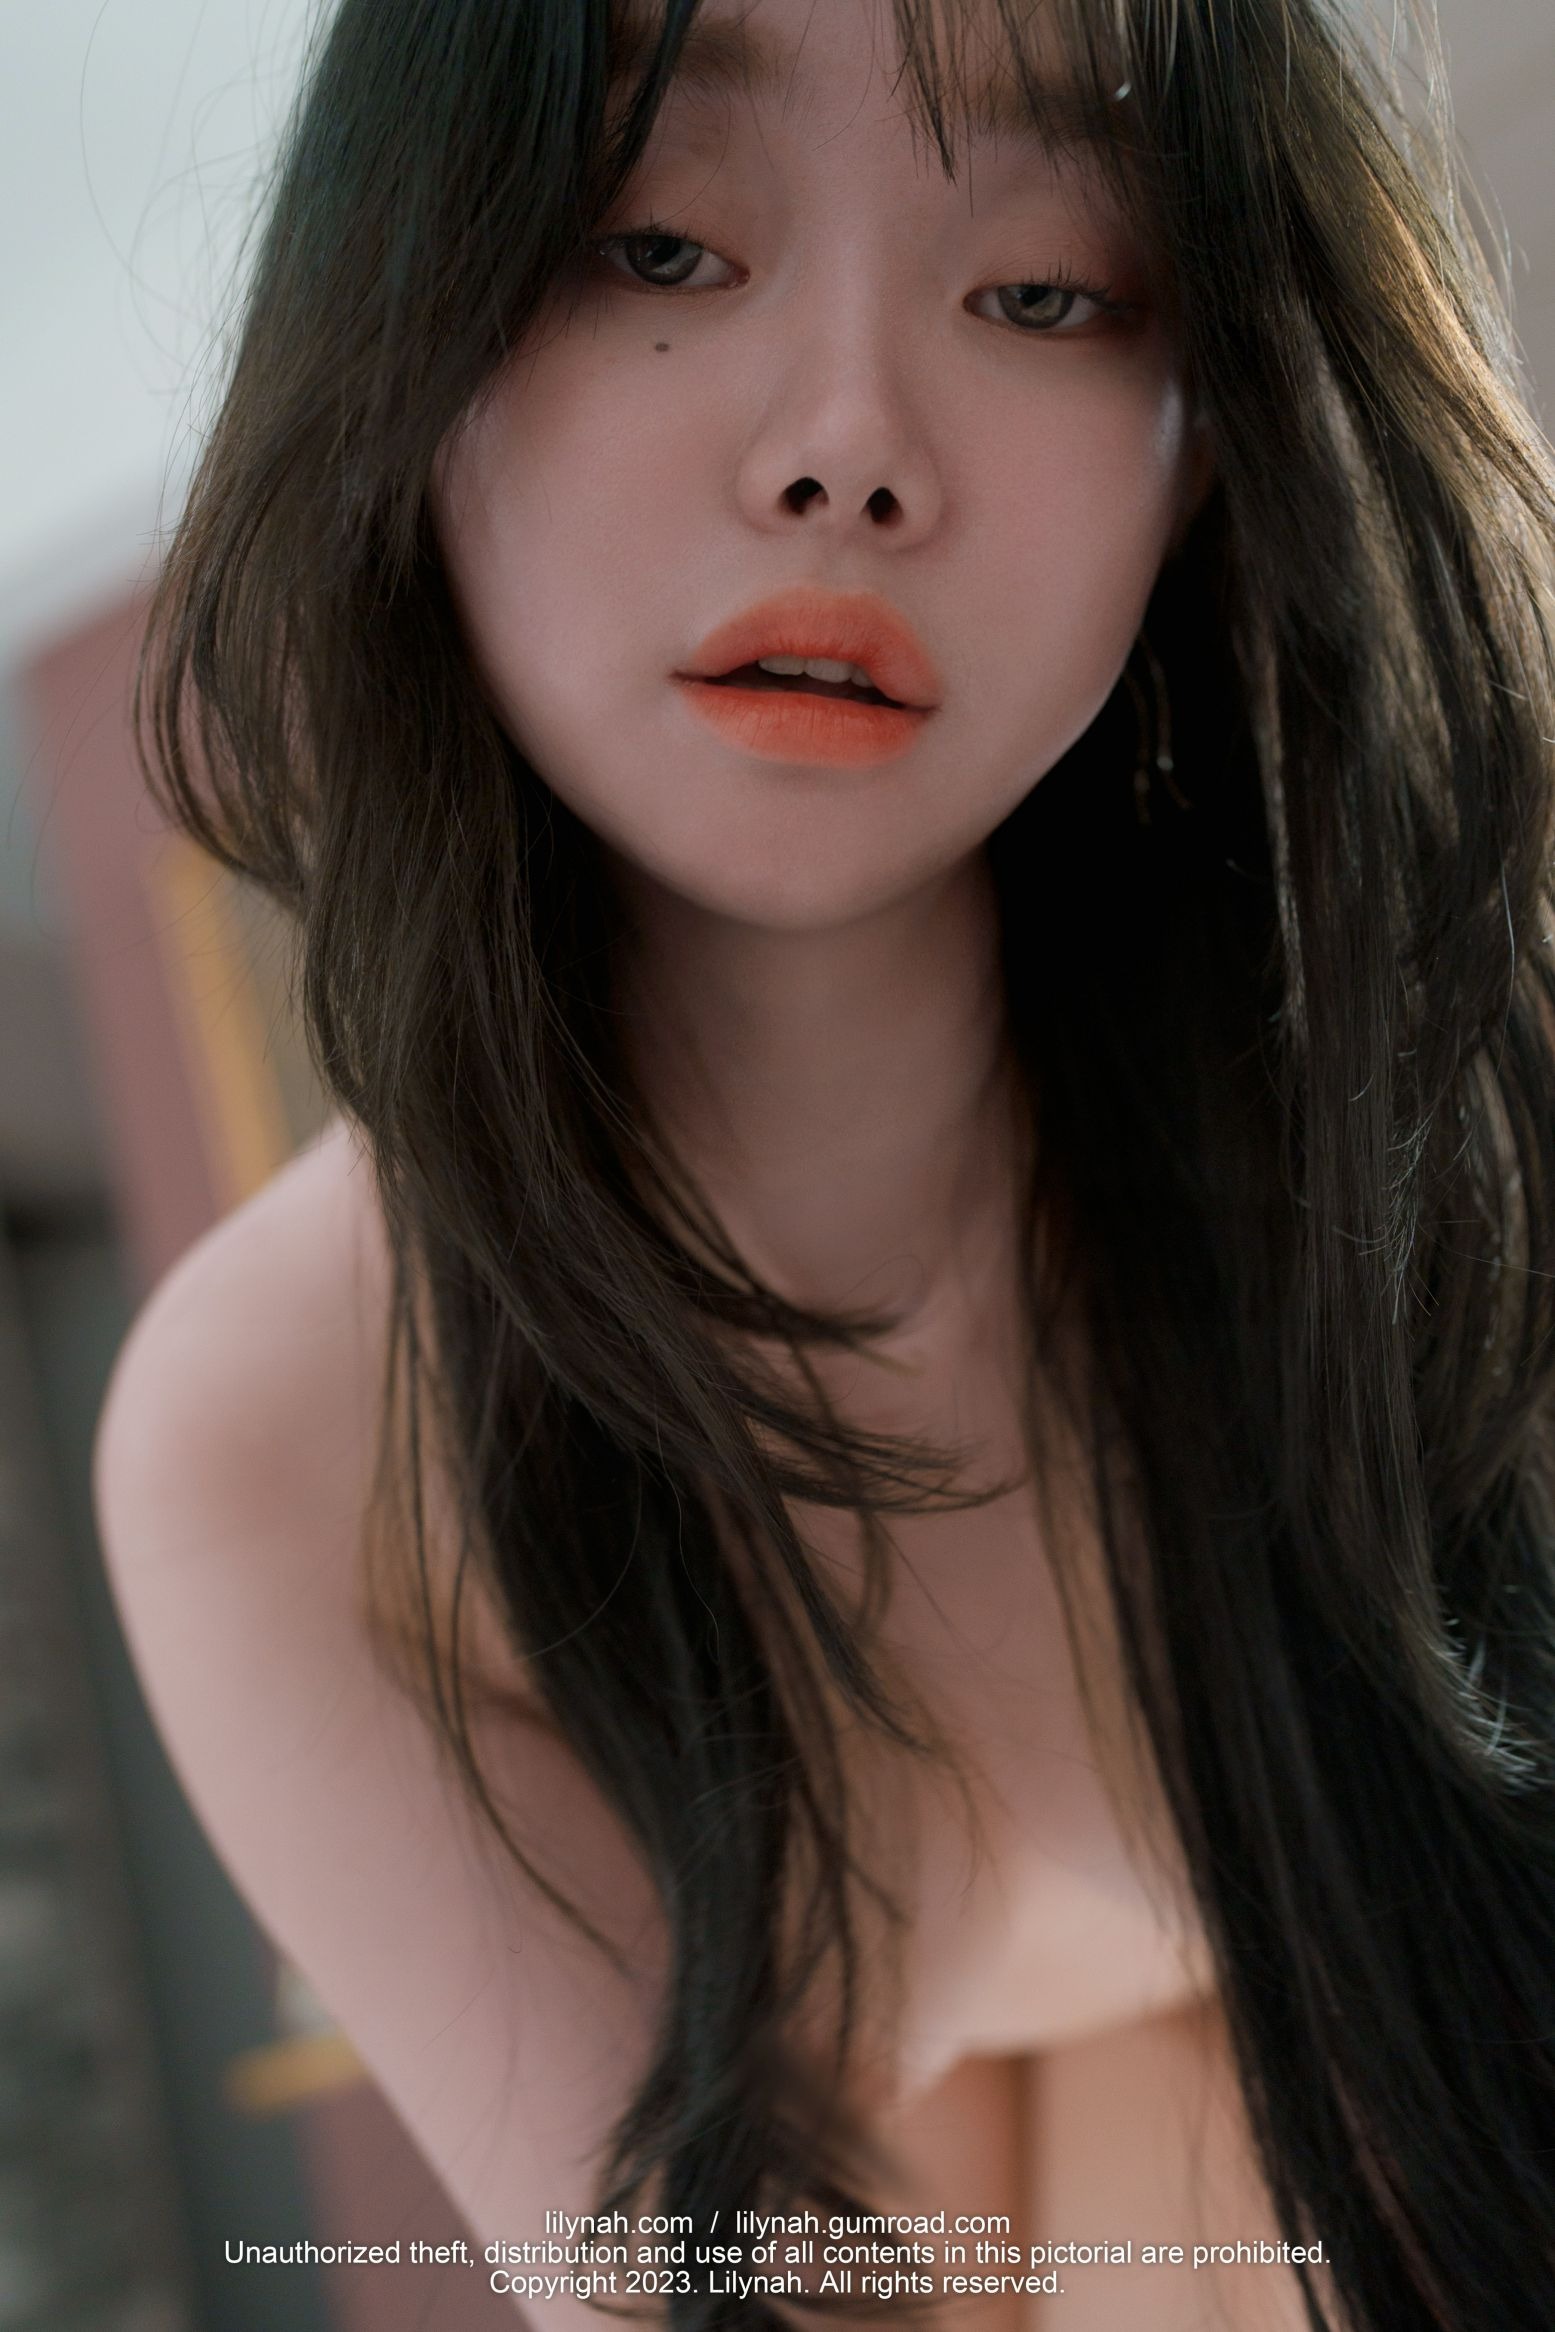 [Lilynah] Inah (이나) Lw081 Vol.34 - My First S(73)